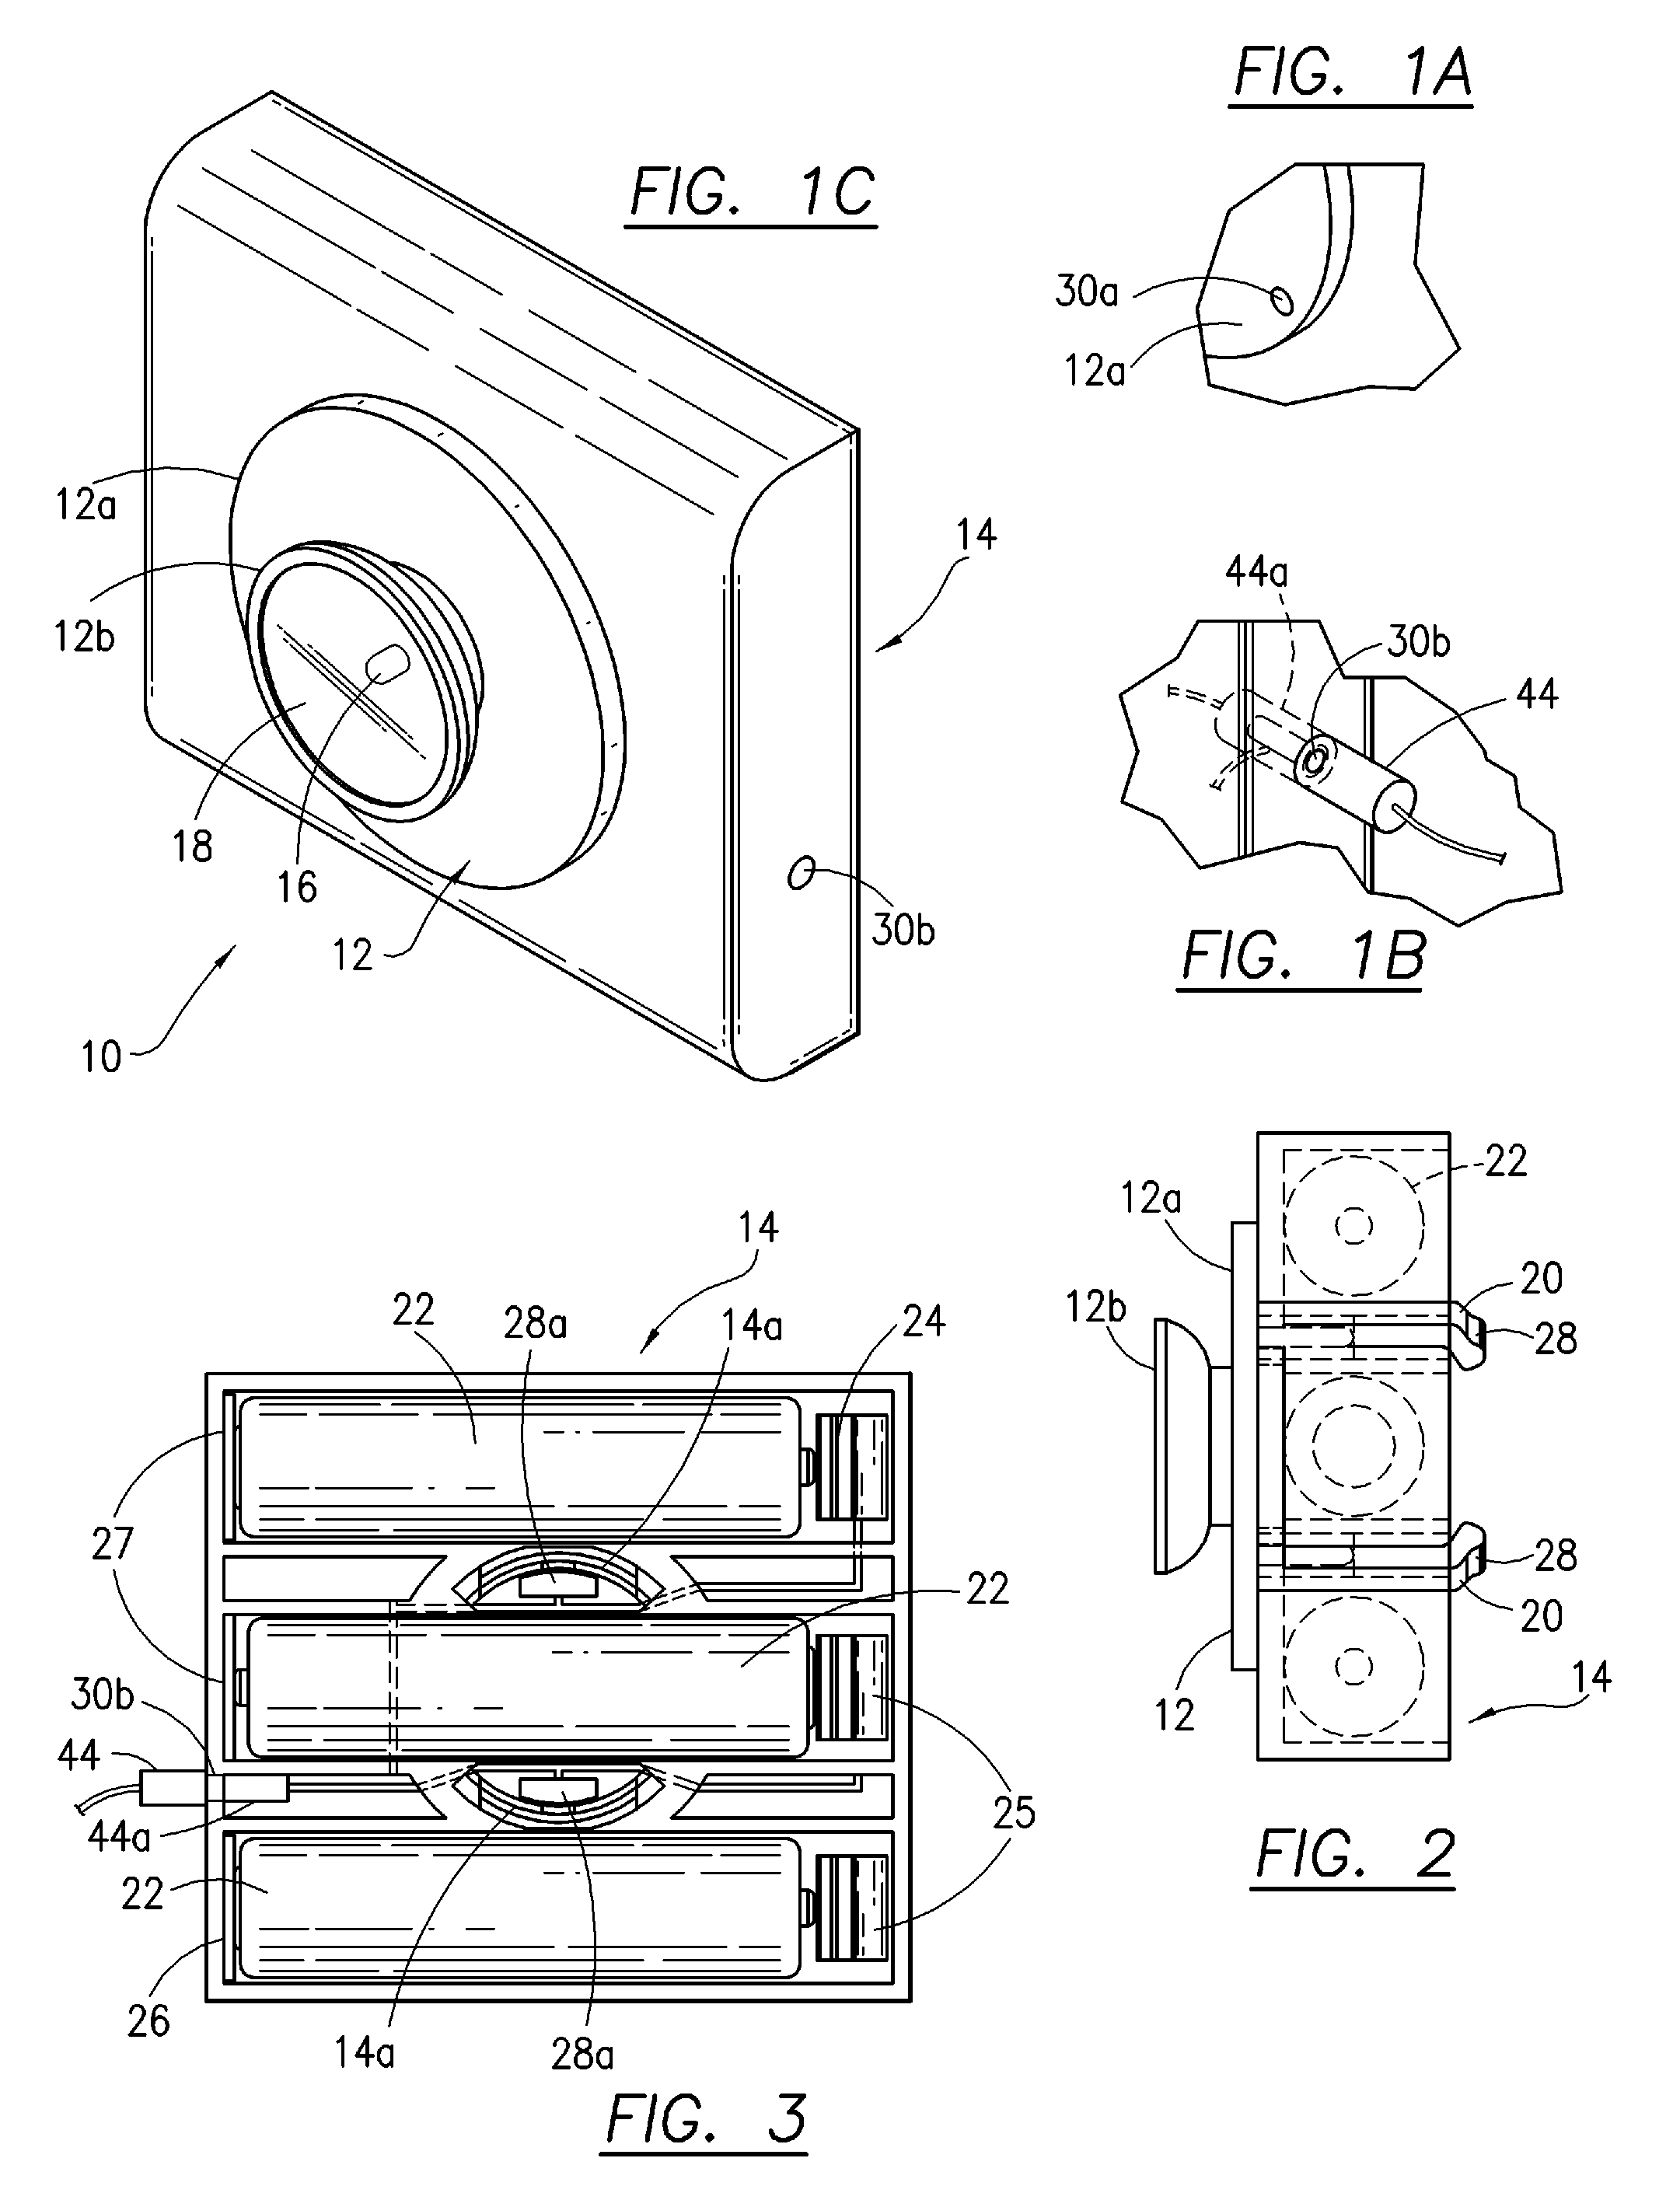 Illumination device mountable through an aperture in a clothing object